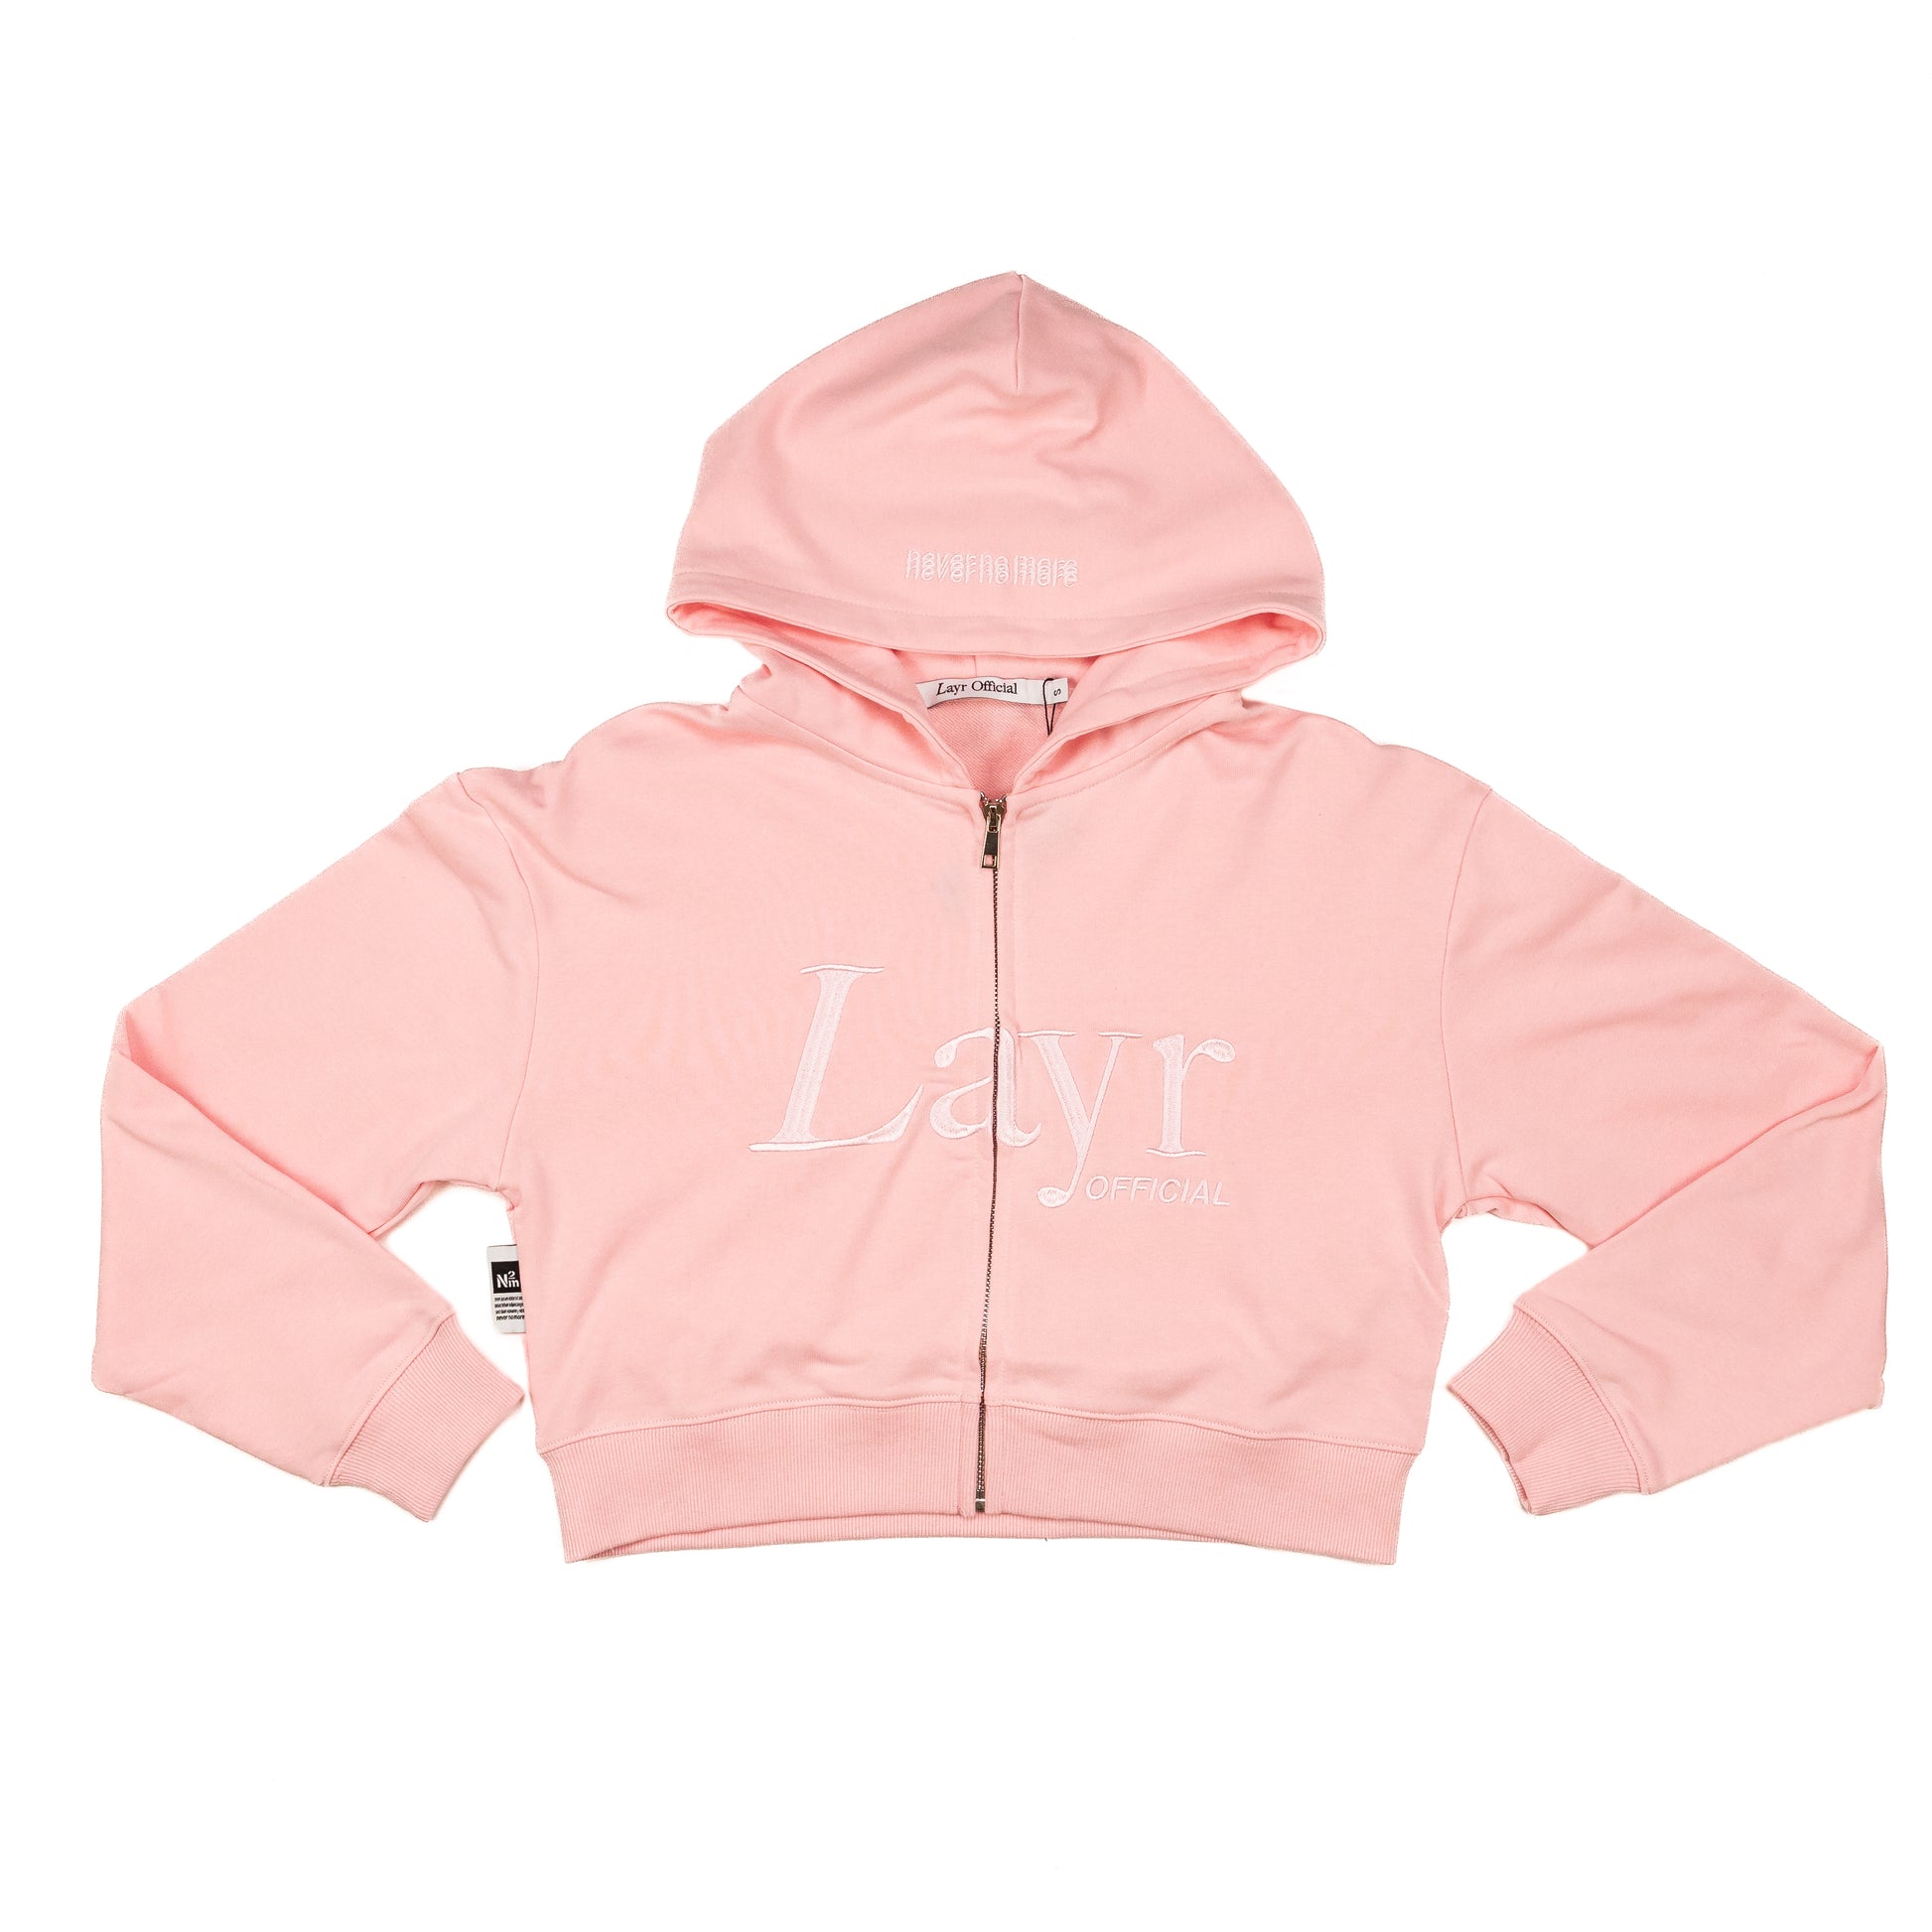 Womens  Layr Official Crop Hoodie, Pink - Layr Official